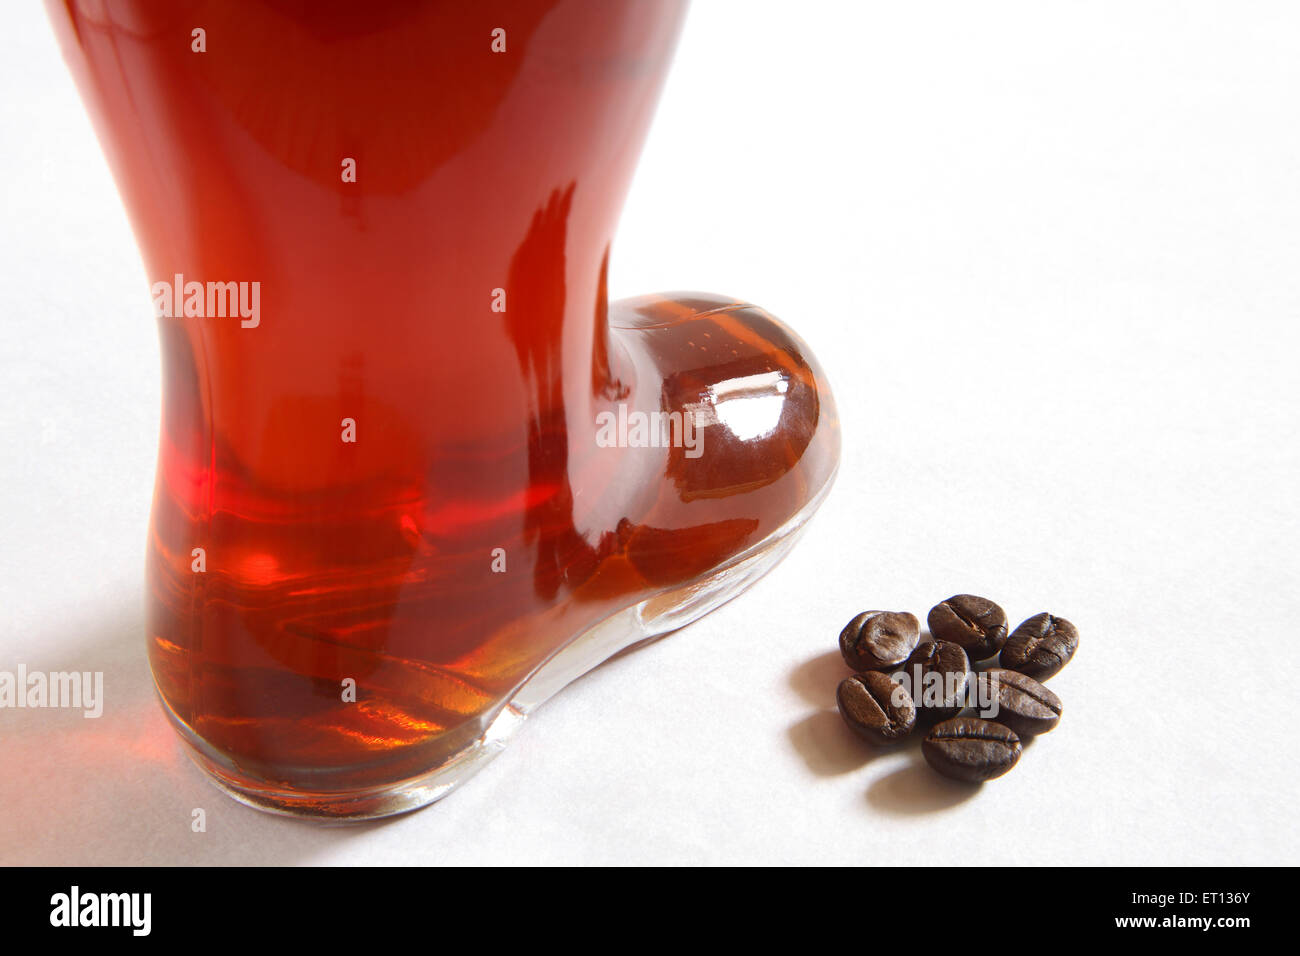 Hot drink ; kahva coffee and seeds ; India Stock Photo